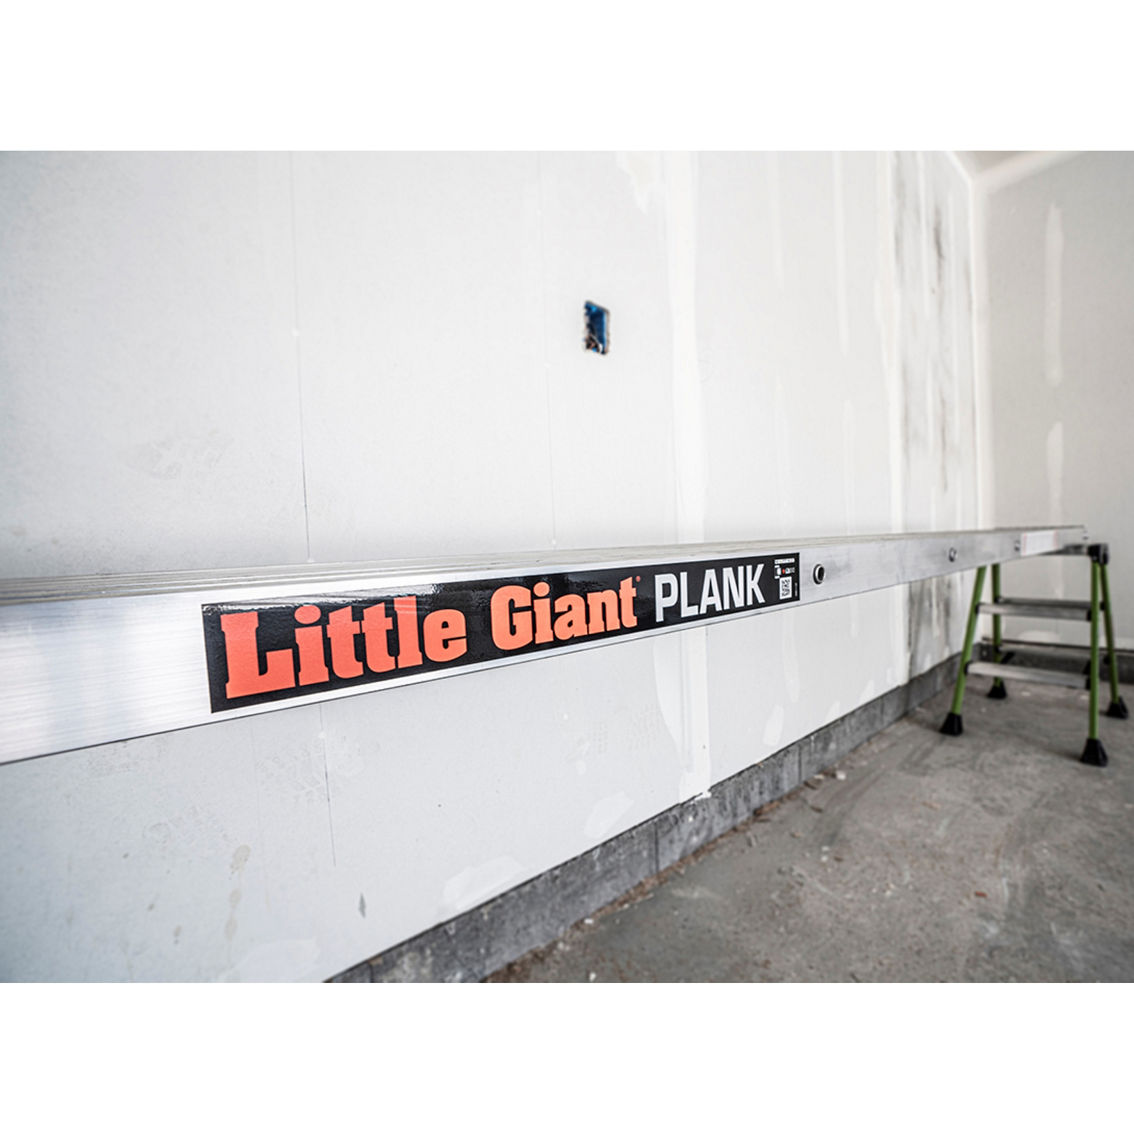 Little Giant Ladders Plank 6 ft. Ladder Accessory - Image 3 of 3